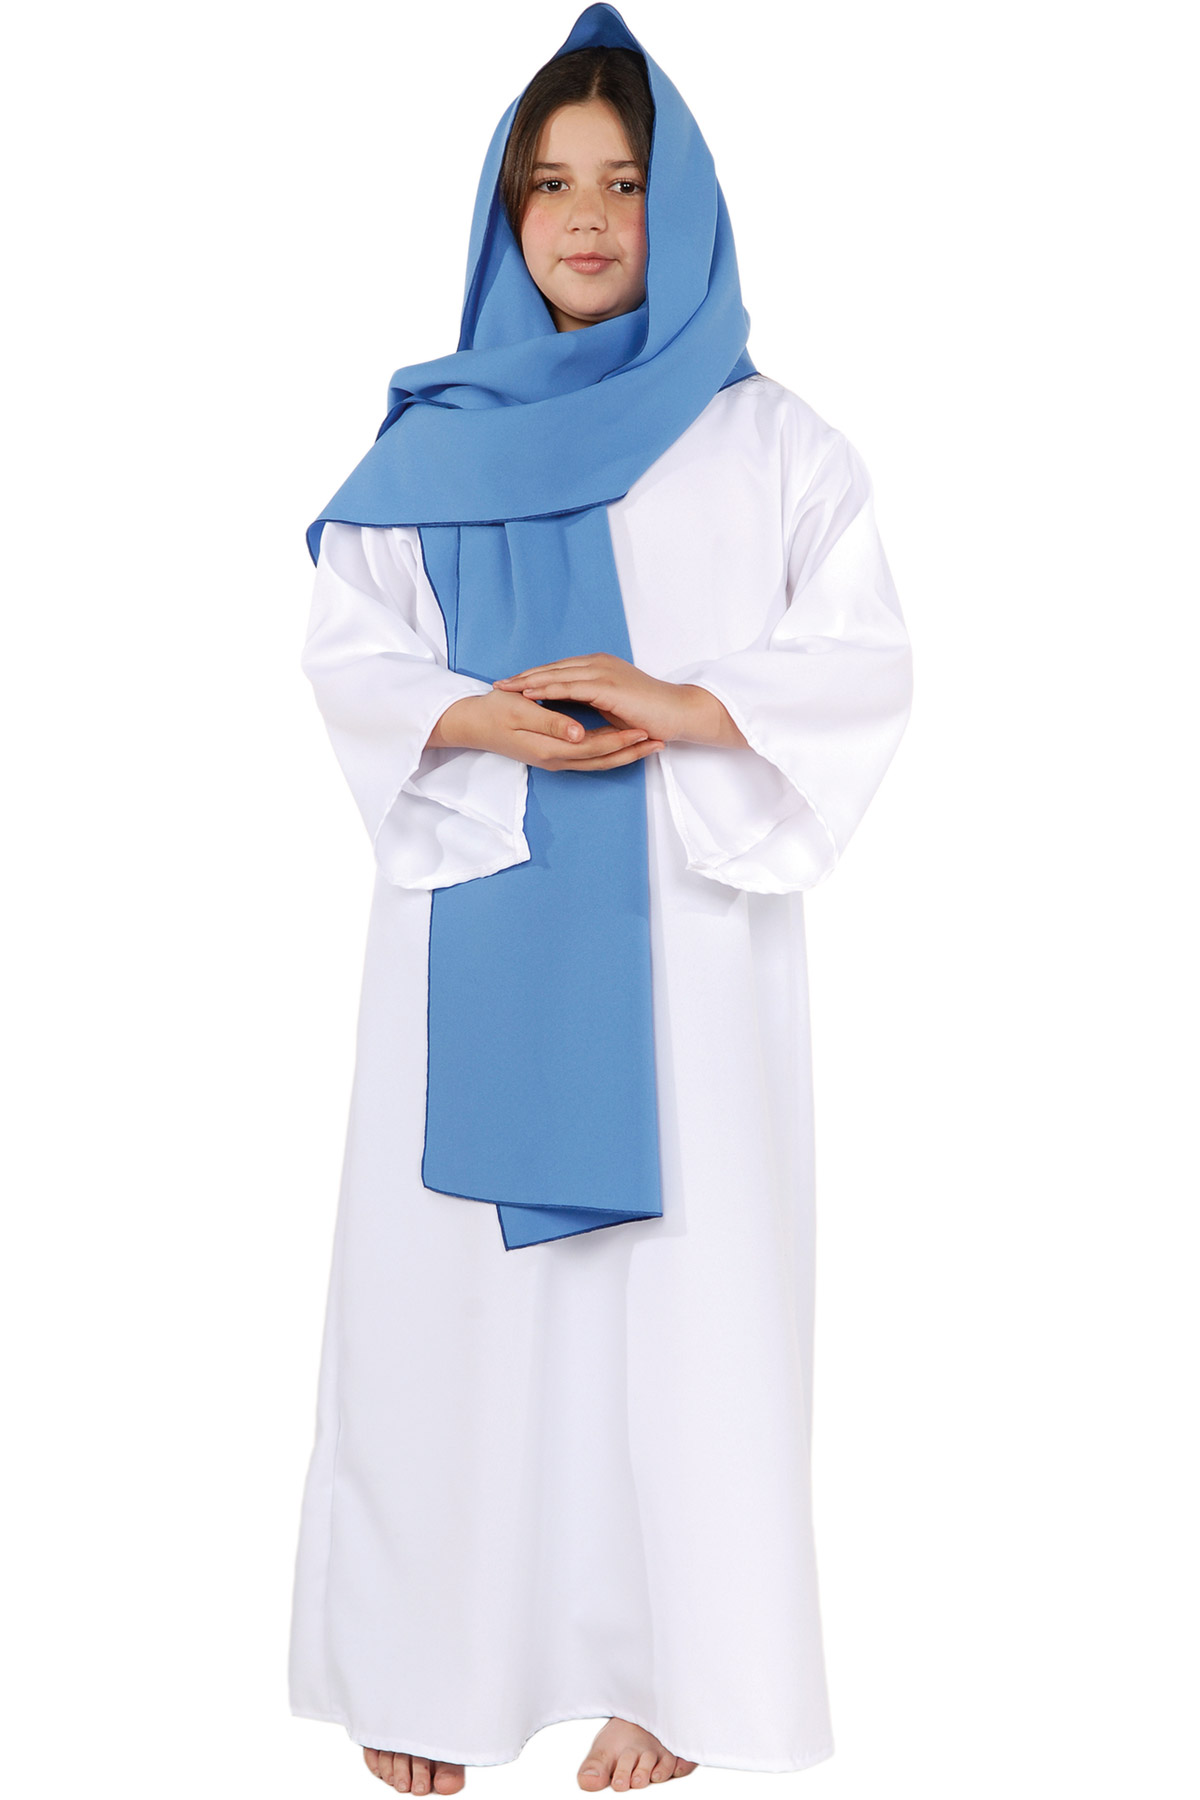 Mary Sleeved Tunic Shoulder Scarf Religious Halloween School Costume Child Boys